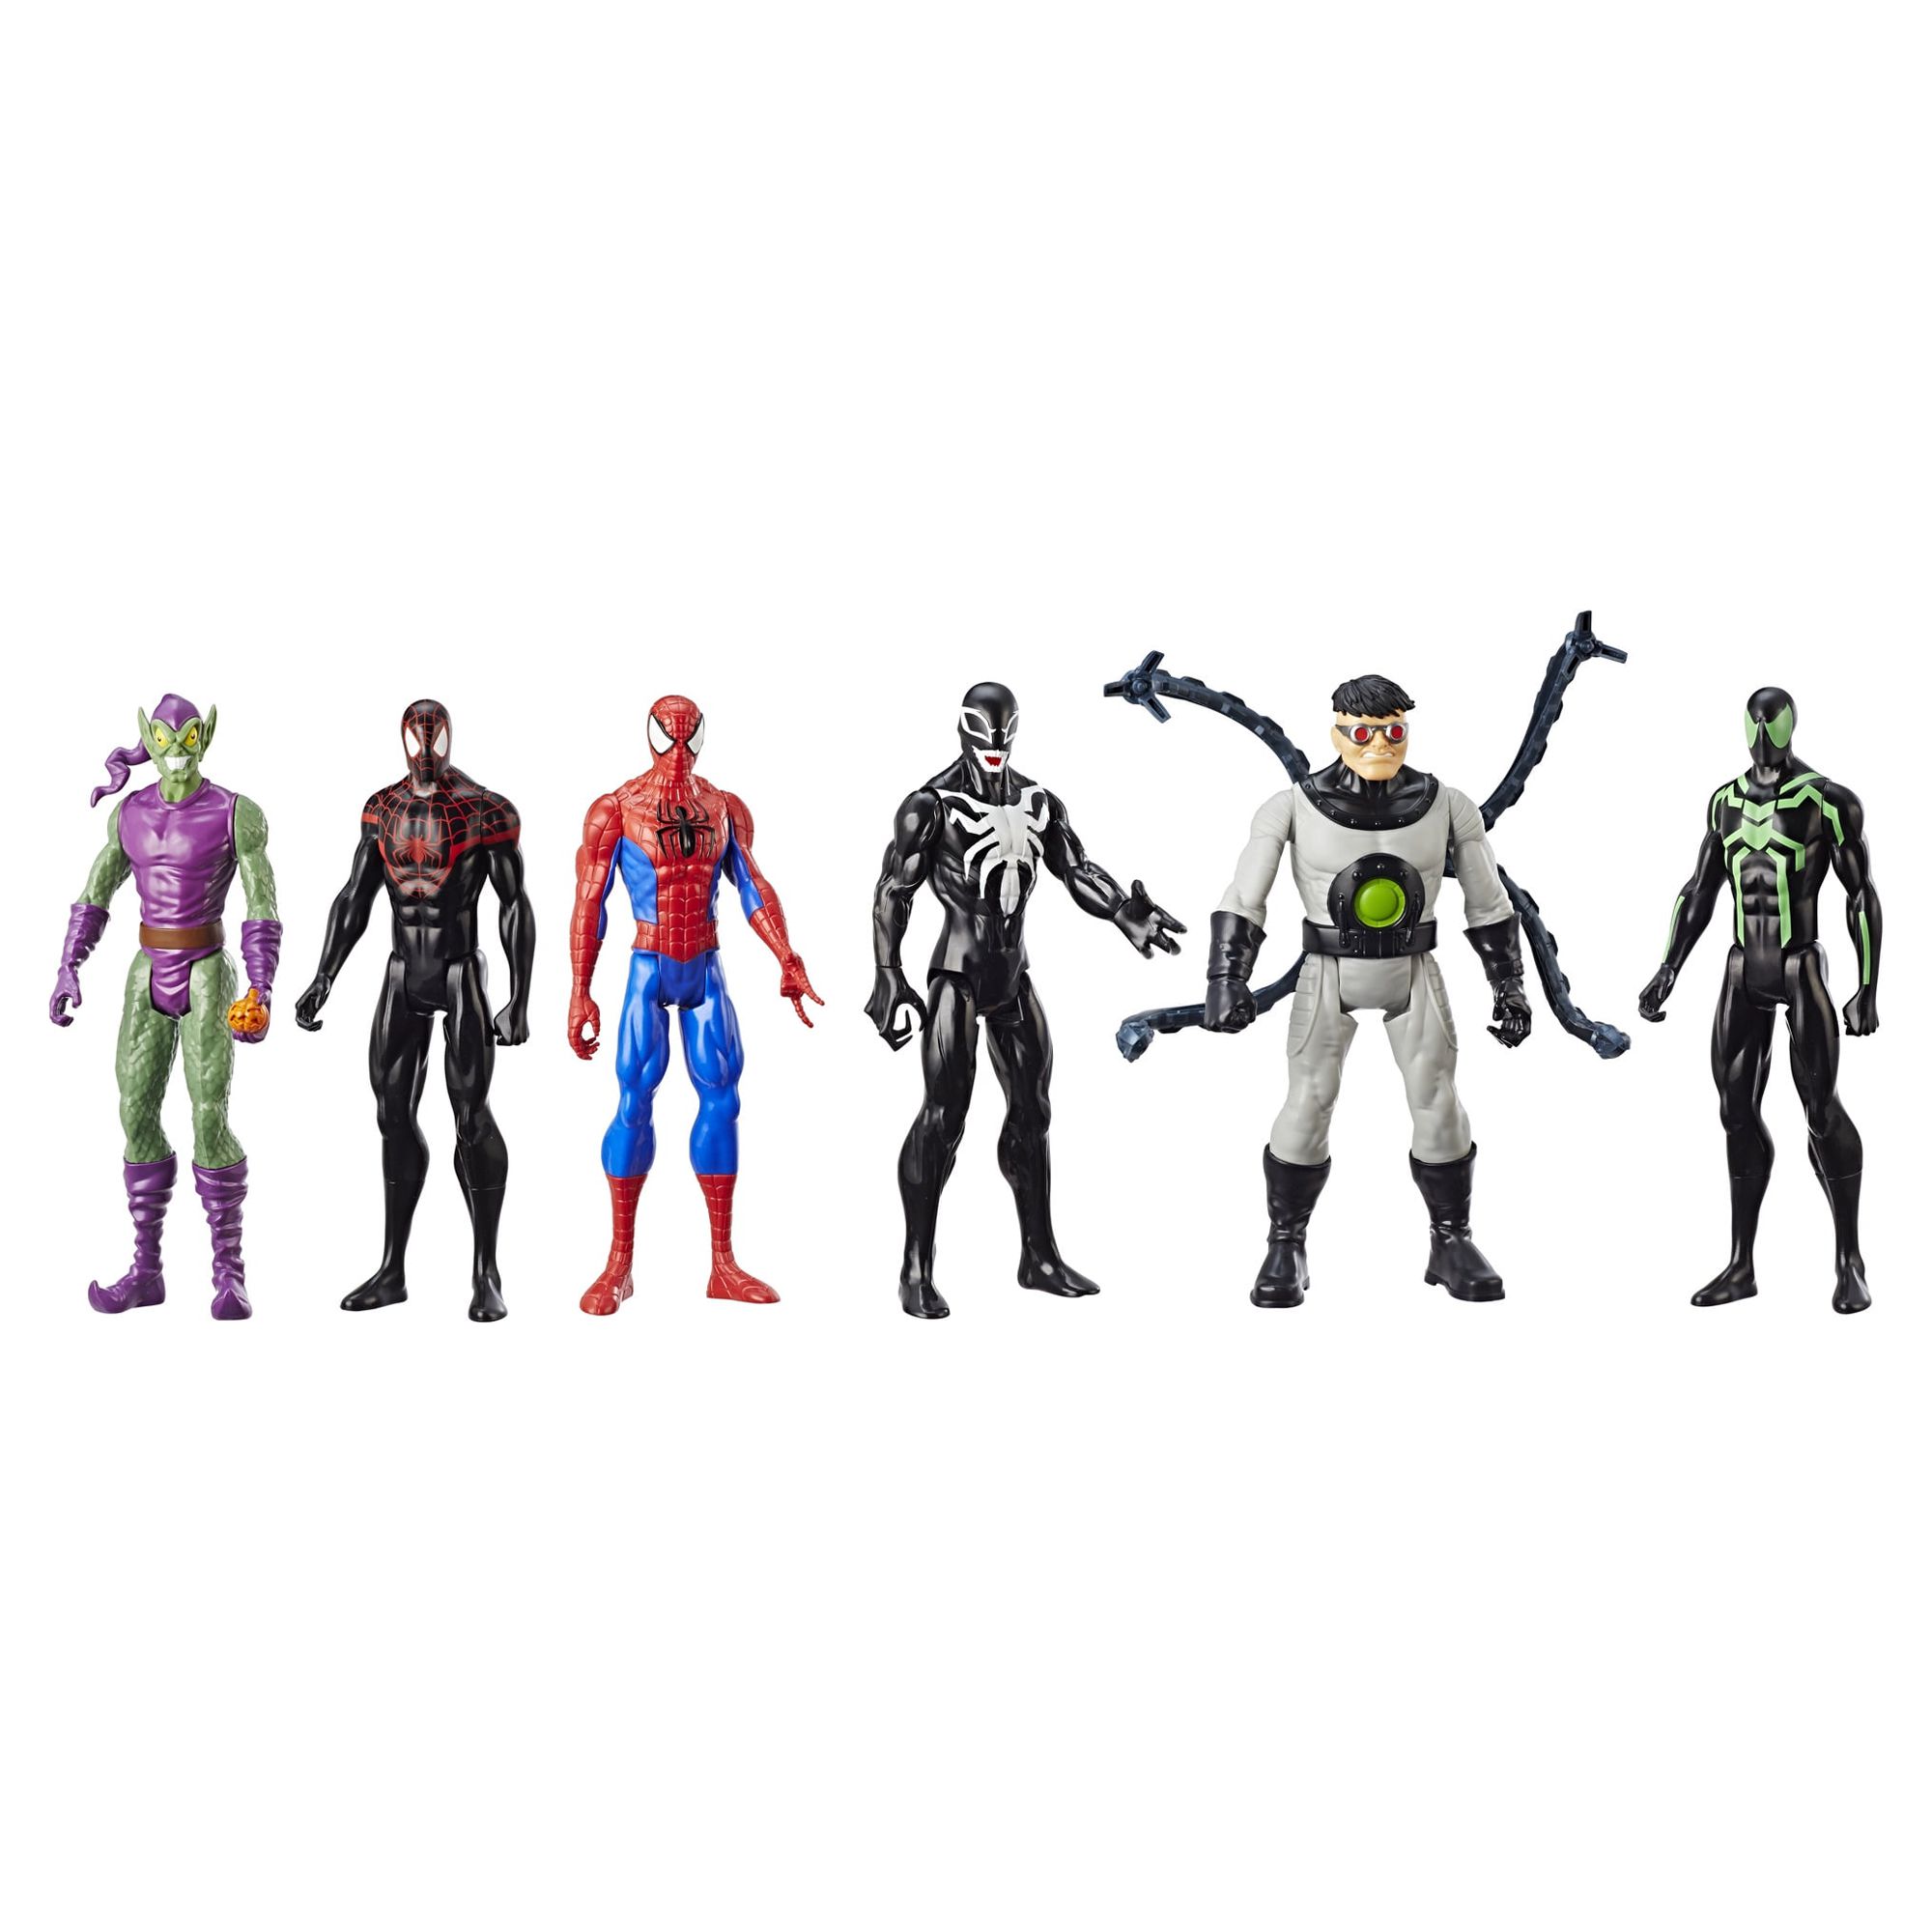 Marvel: Spider-Man Titan Hero Series Kids Toy Action Figure Set for Boys and Girls Ages 4 5 6 7 8 and Up, 6 Pieces - image 1 of 2